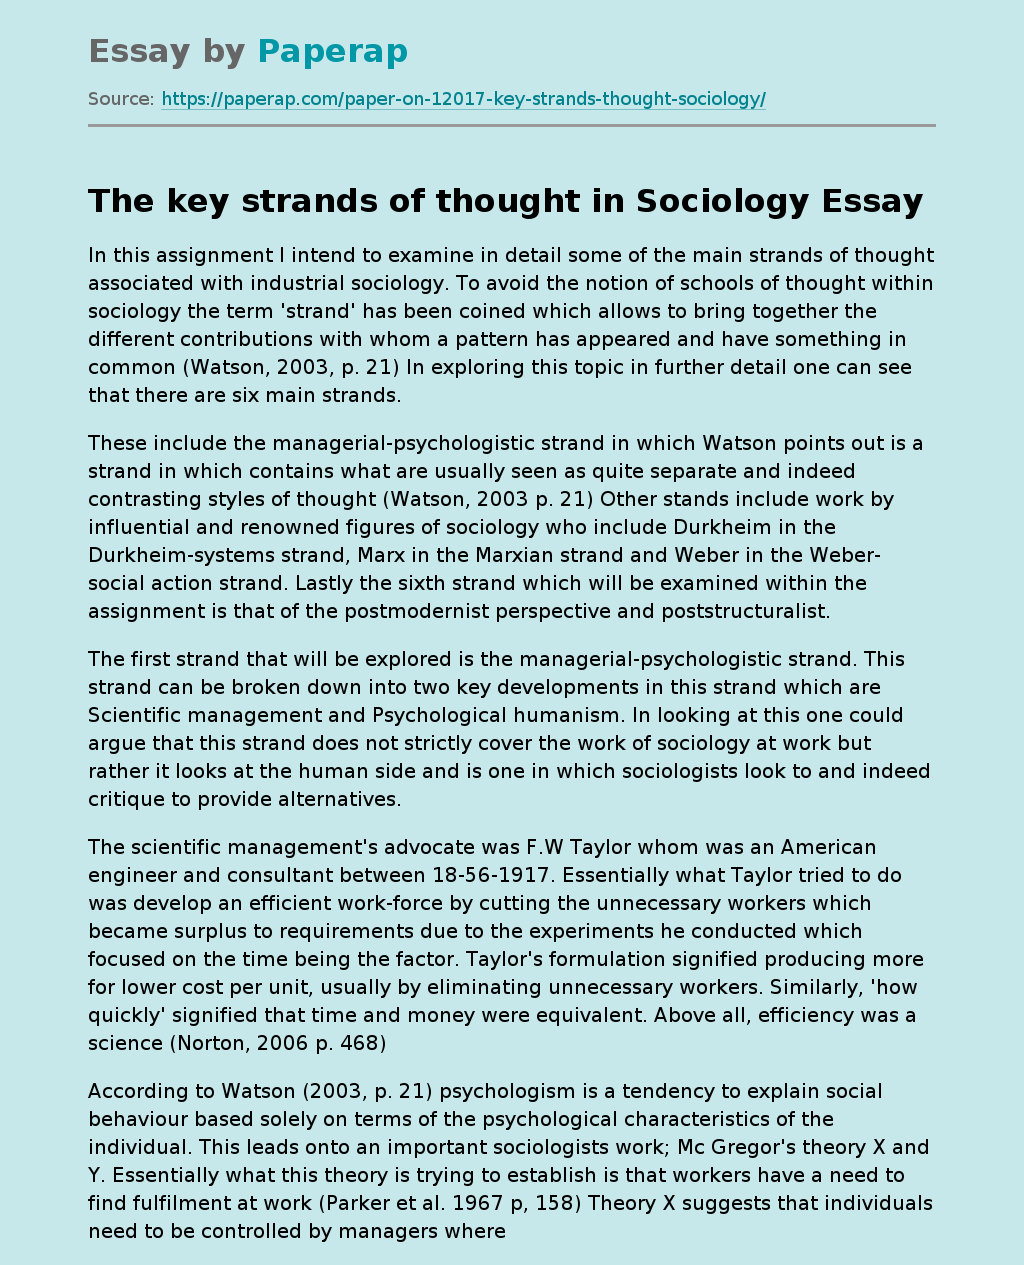 The key strands of thought in Sociology